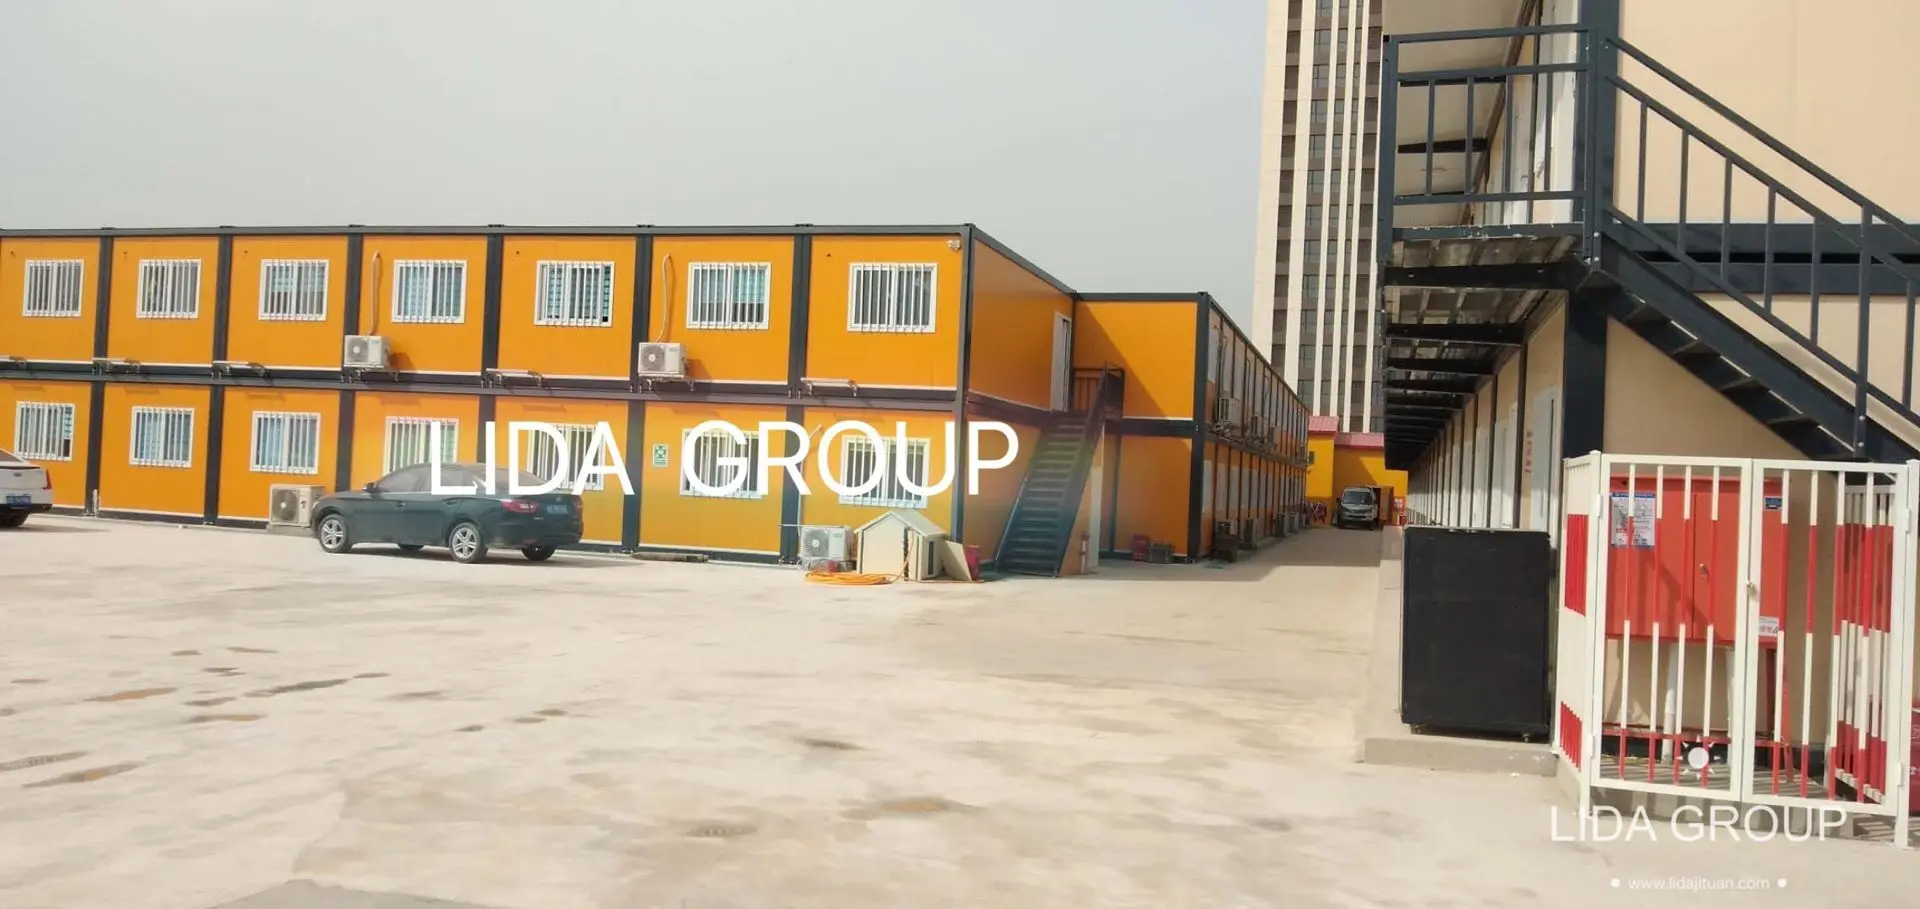 Lida Group prefab container homes bulk buy used as booth, toilet, storage room-7